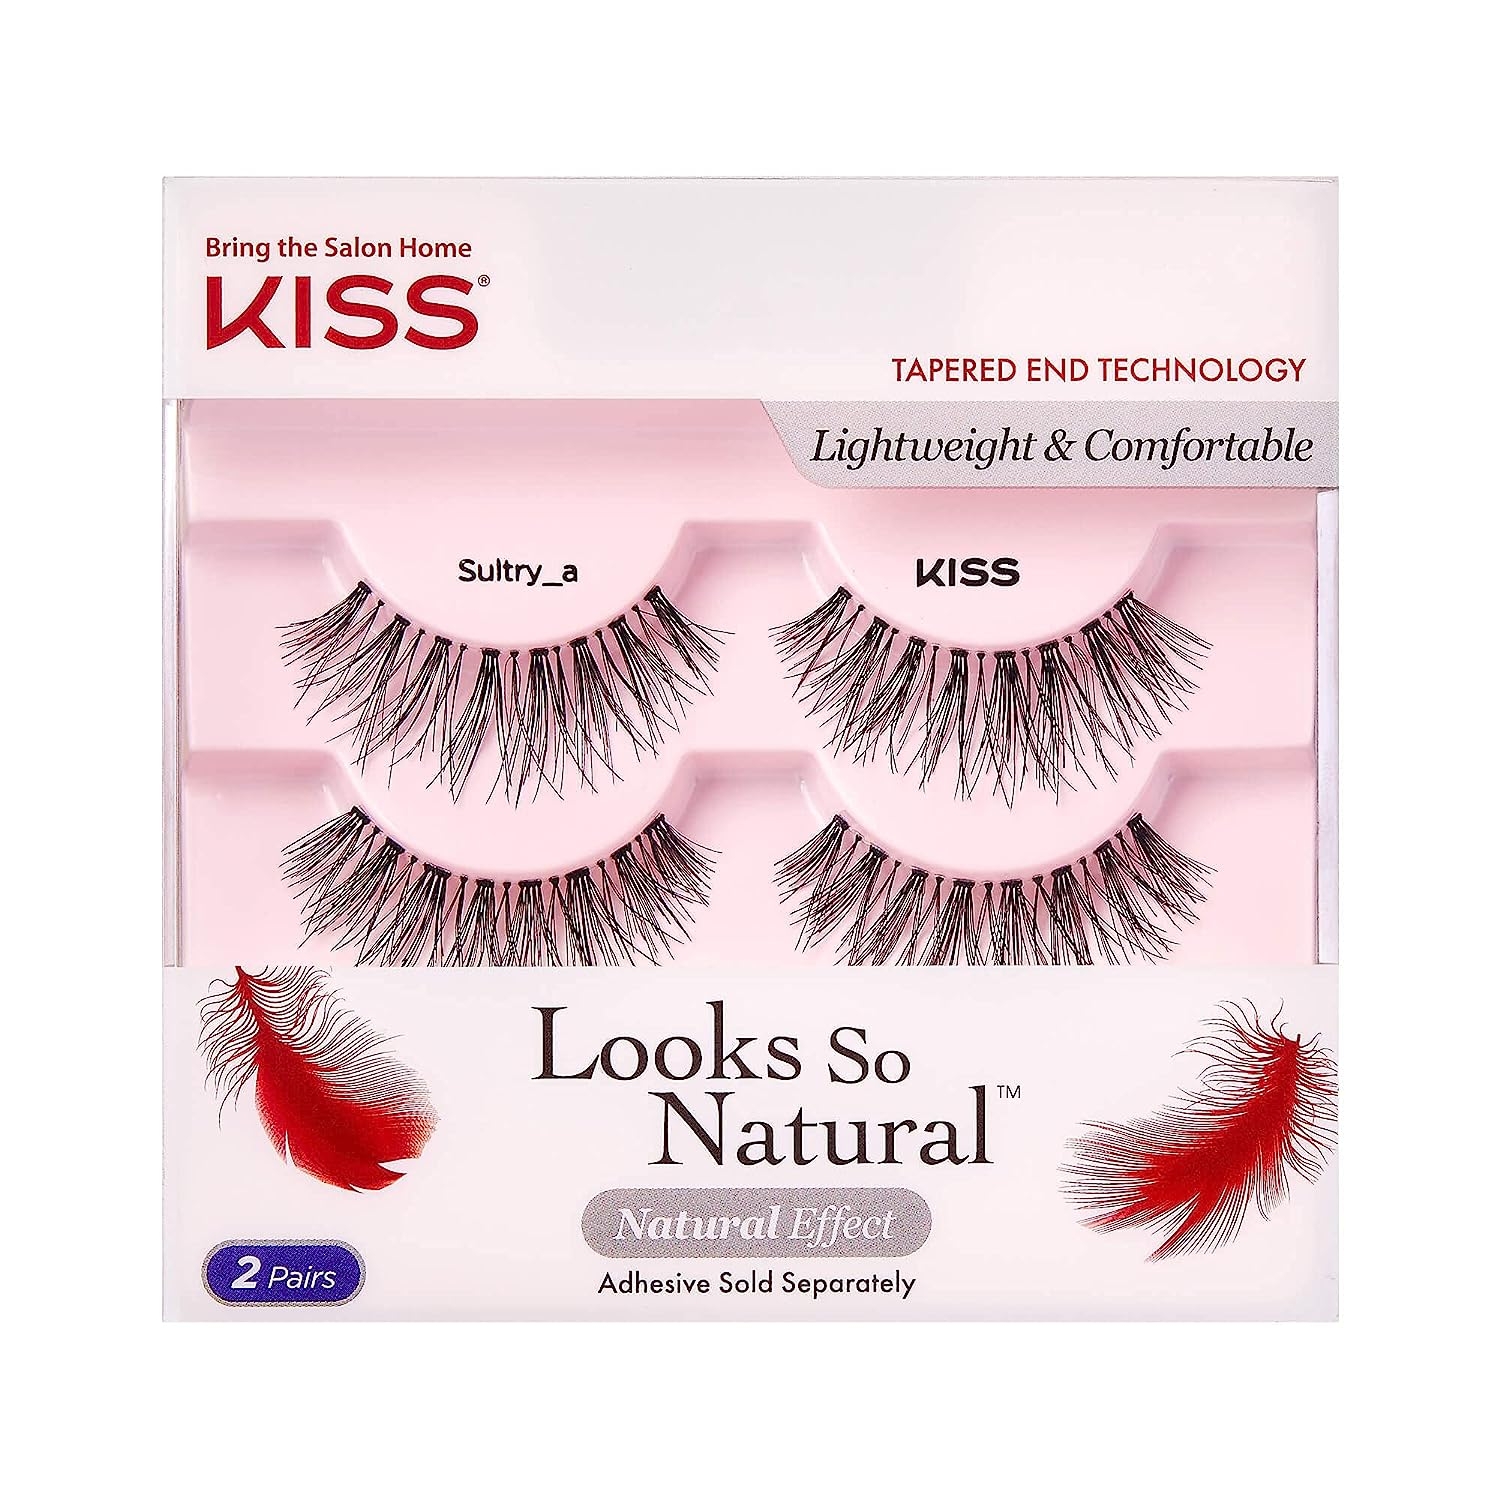 KISS So Wispy False Eyelashes Multipack 11, Full Bouncy Volume & Curl, Signature Wispy Effect, Quality Synthetic, Crisscross